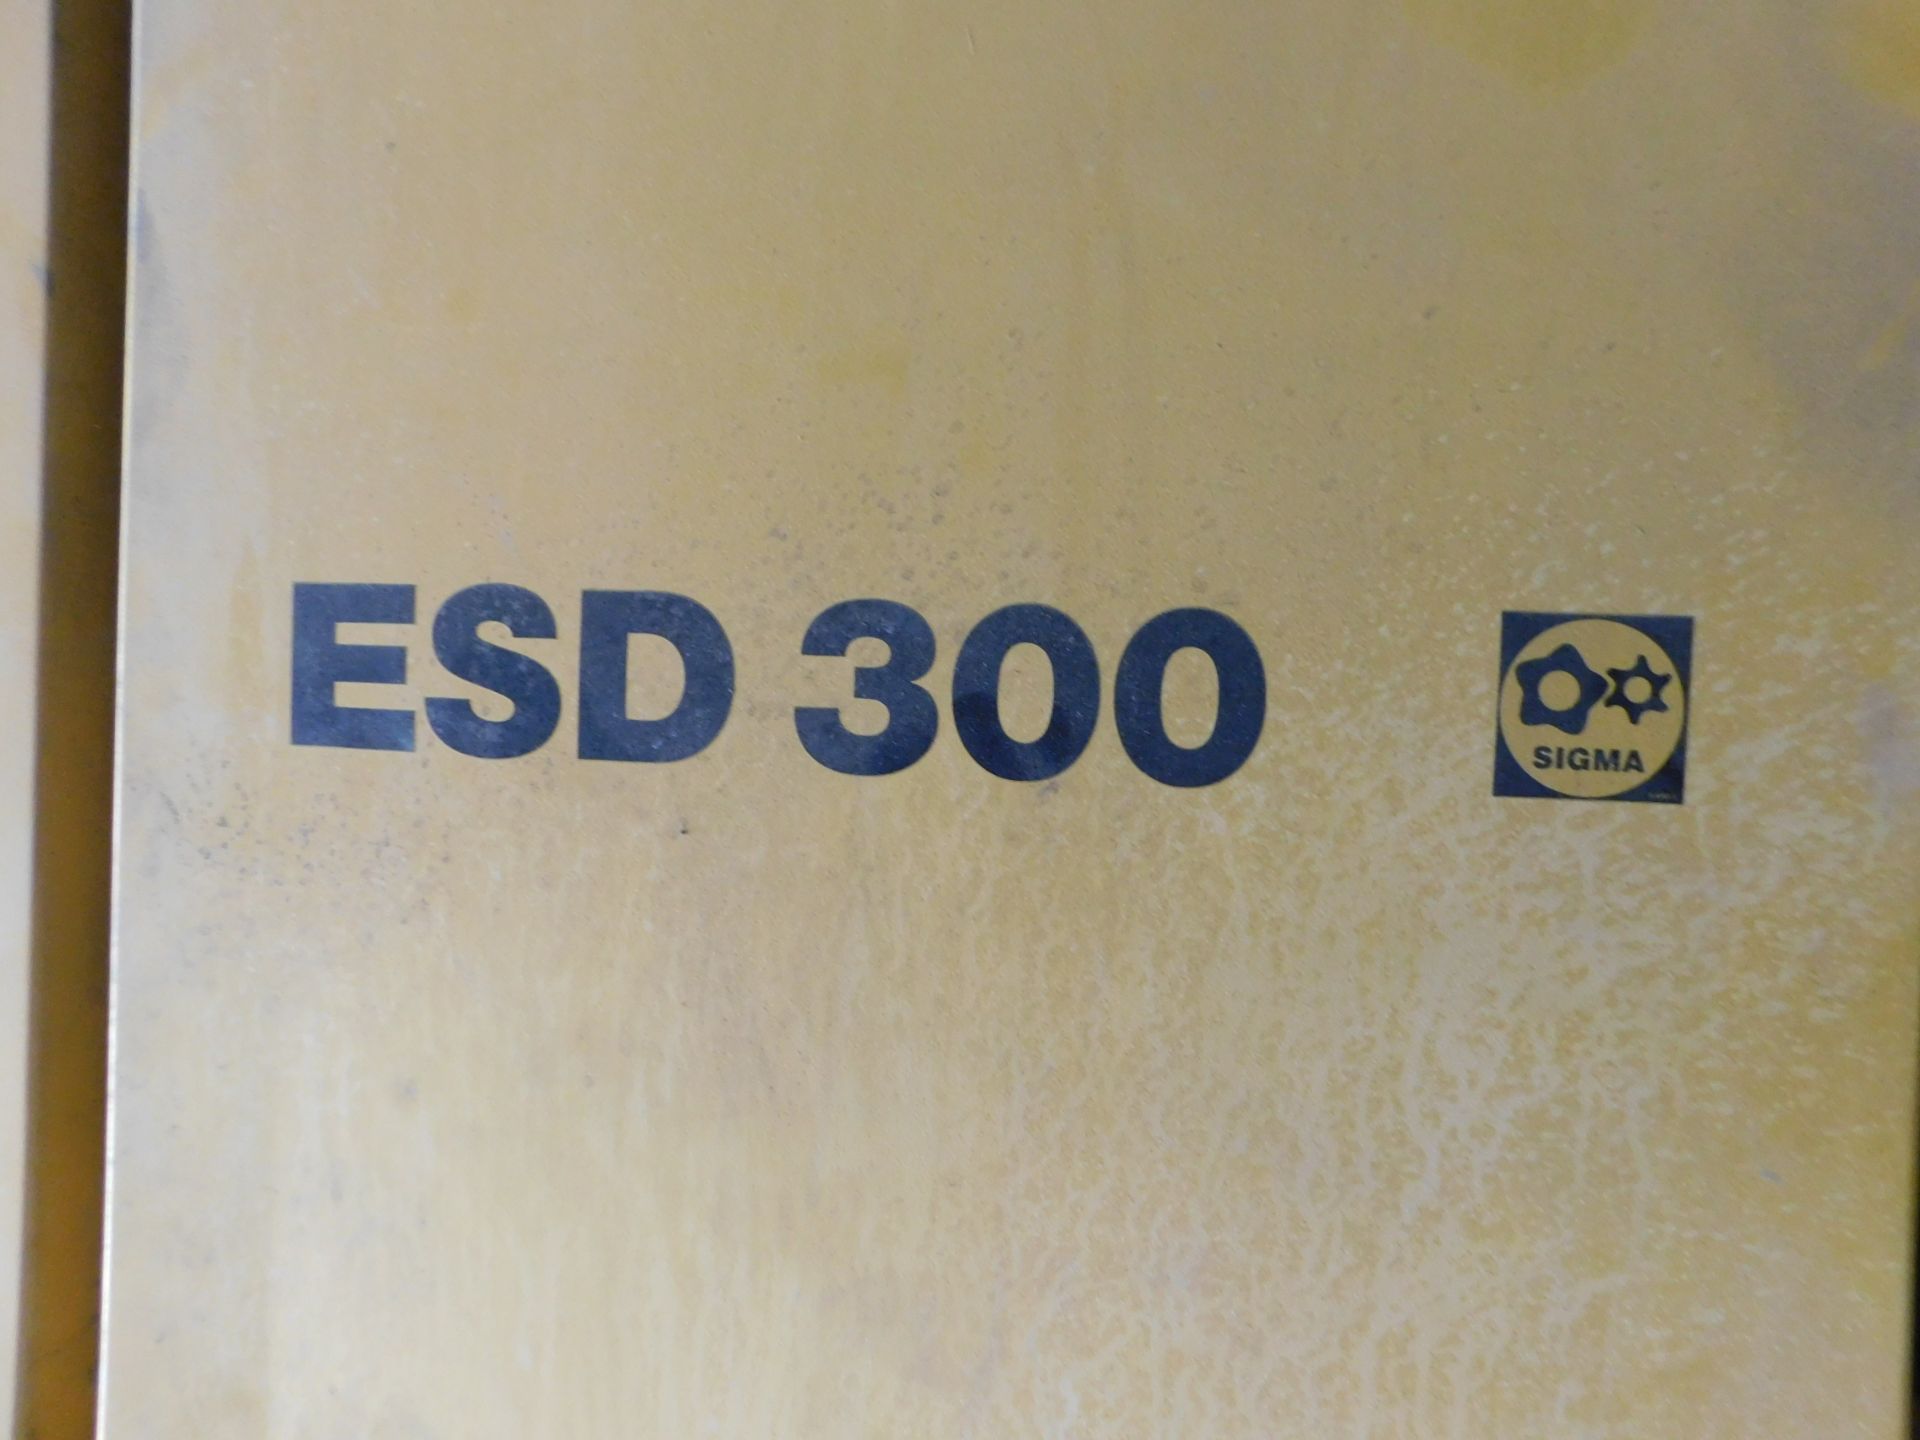 Kaeser ESD300 Rotary Screw Air Compressor, s/n 1022, 300 HP, Direct Drive - Image 4 of 4